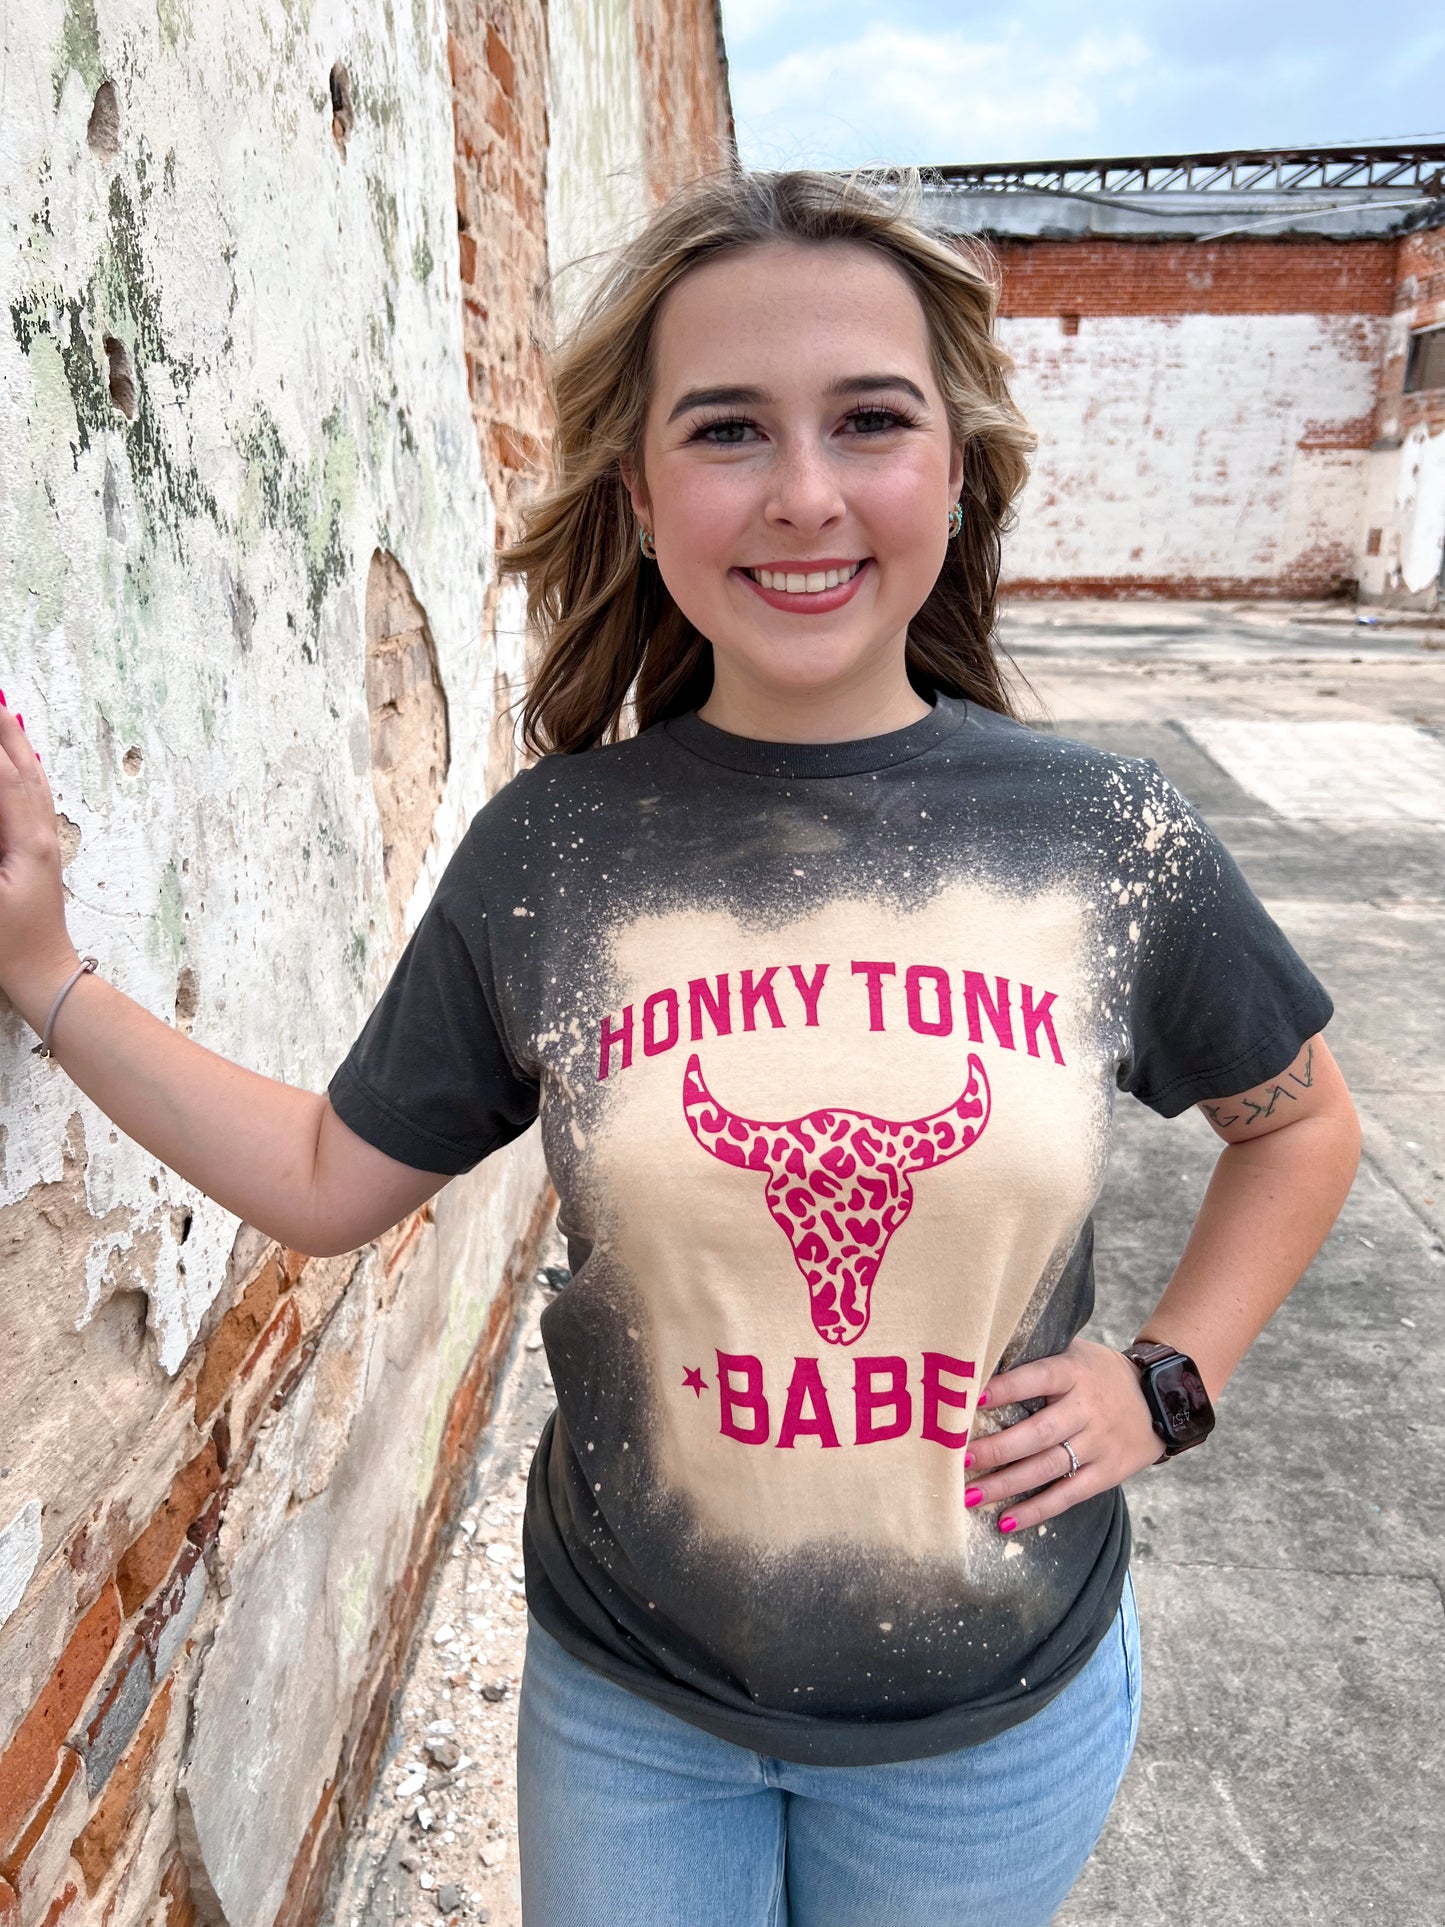 Honky Tonk Babe Bleached Tee Shirt-Shirt-Bling-A-Gogo-8/29/23-The Twisted Chandelier